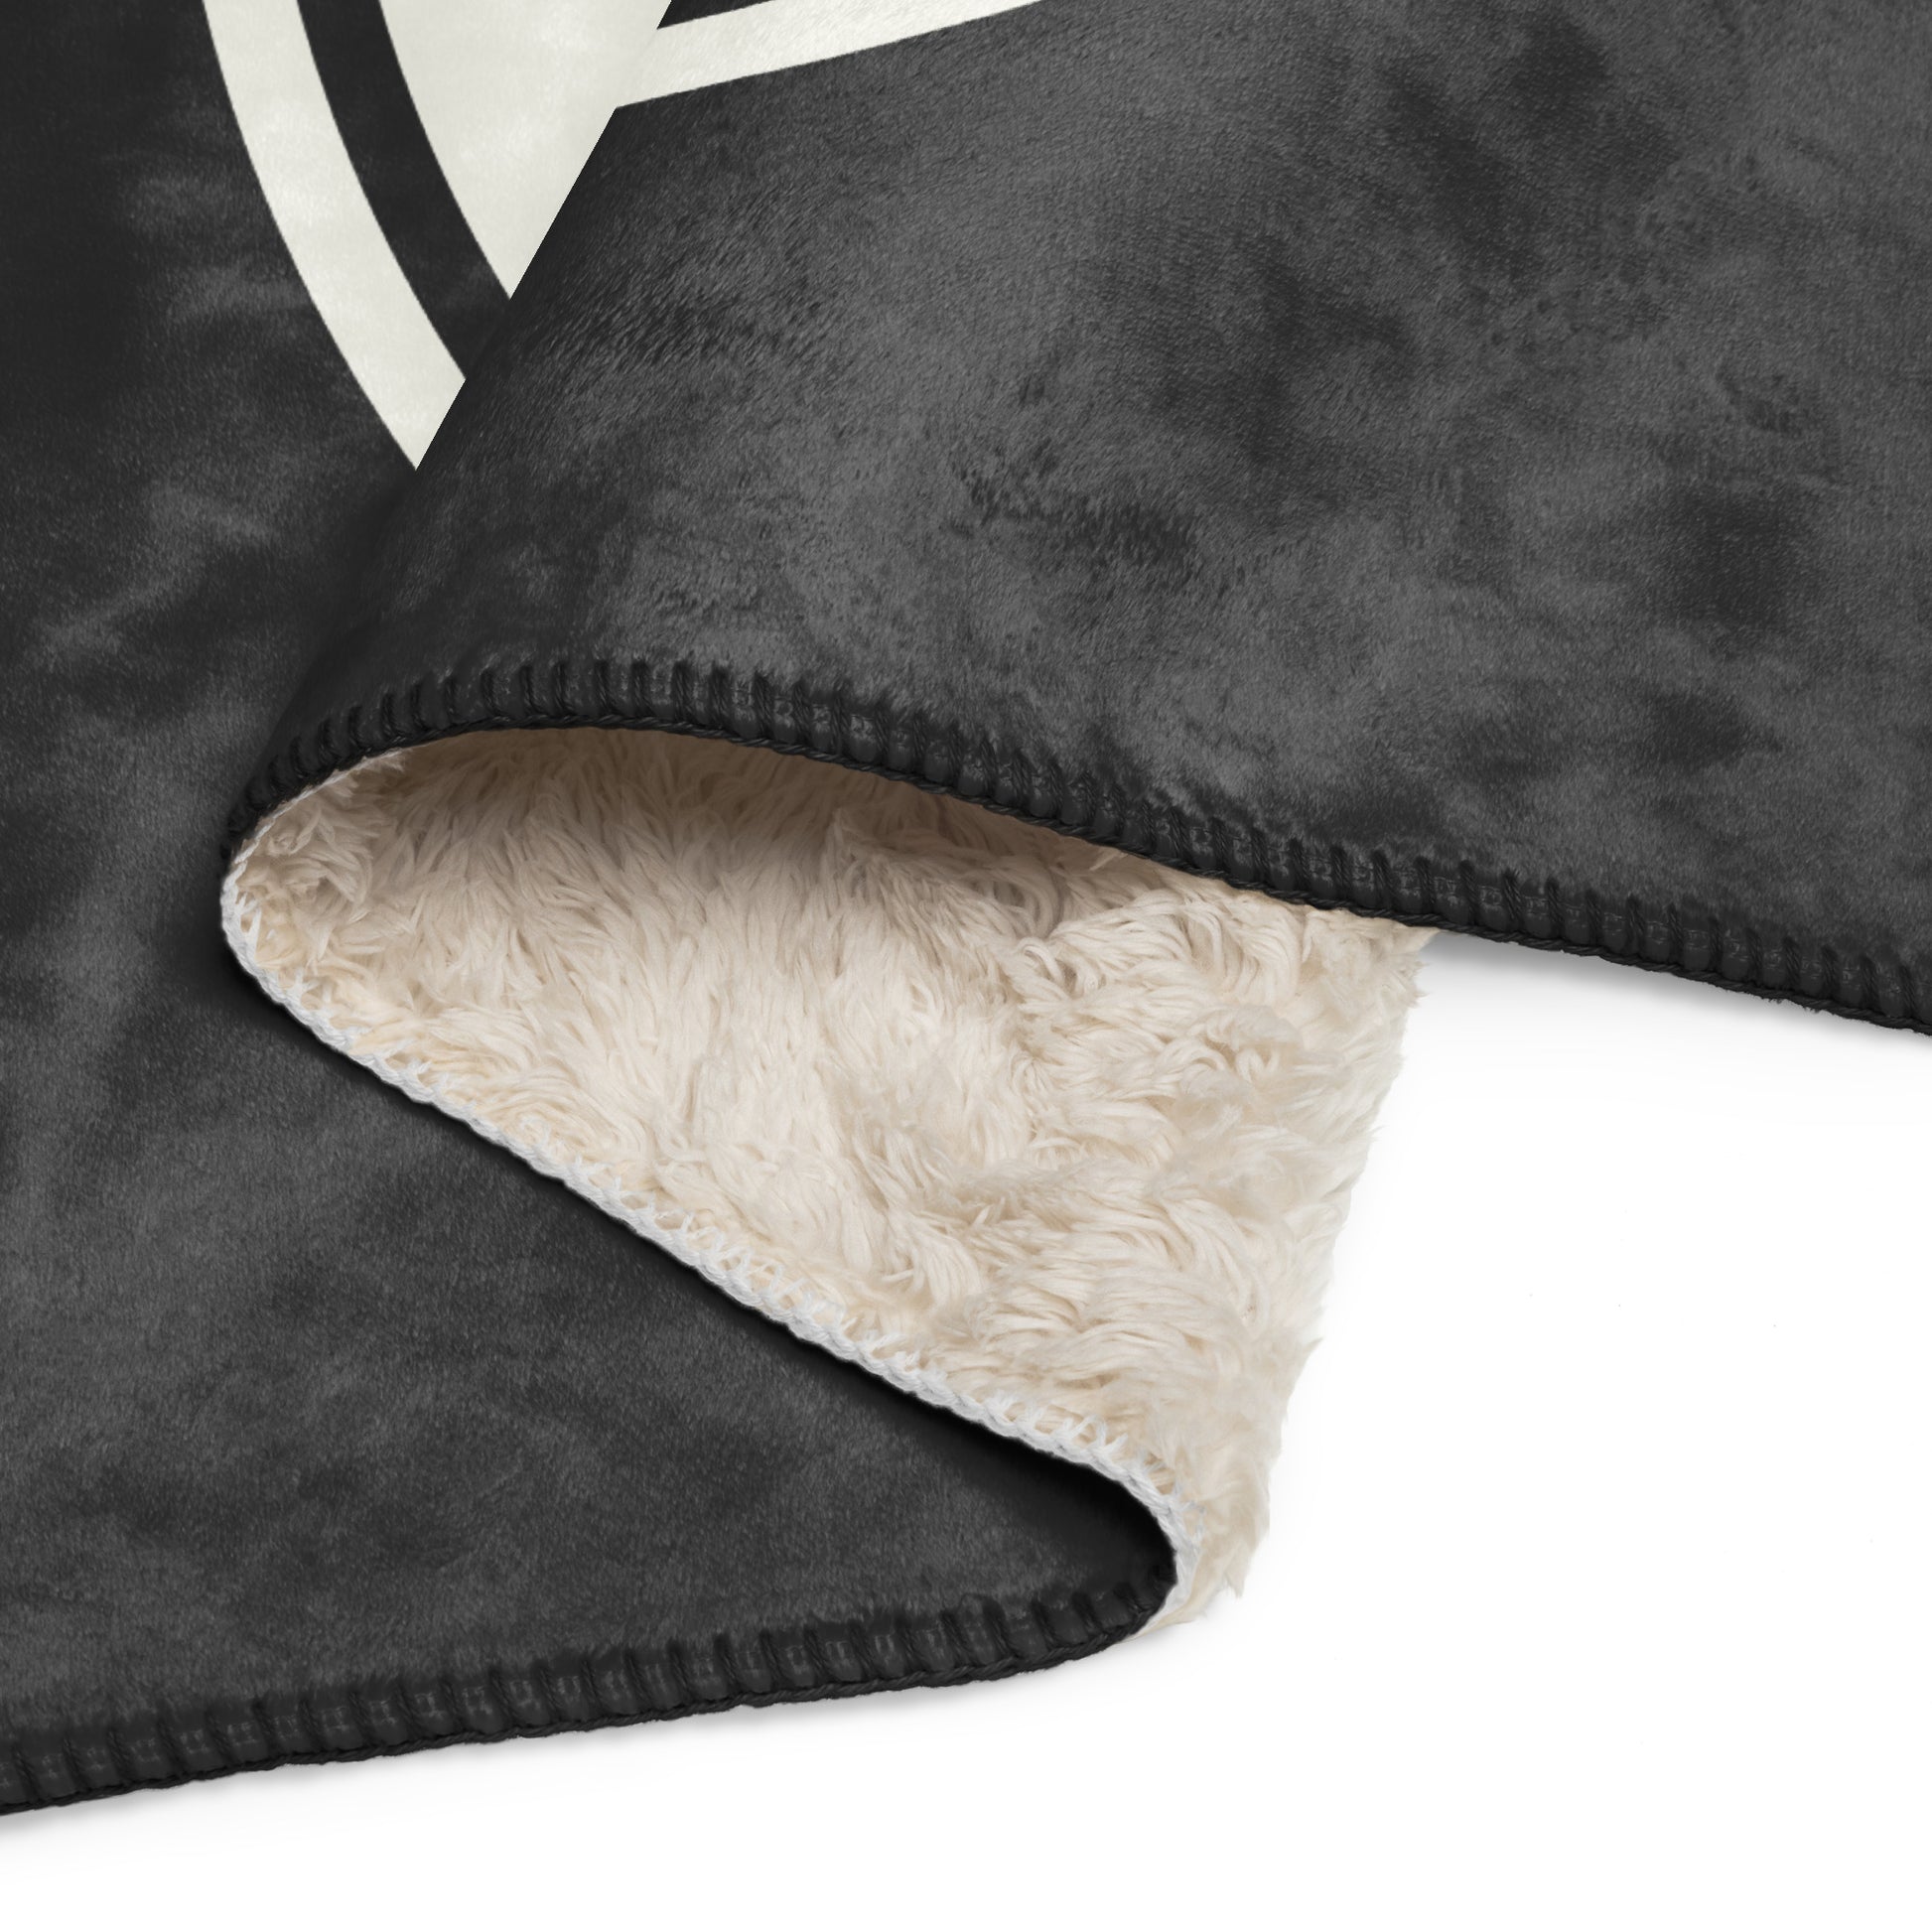 Unique Travel Gift Sherpa Blanket - White Oval • IND Indianapolis • YHM Designs - Image 08